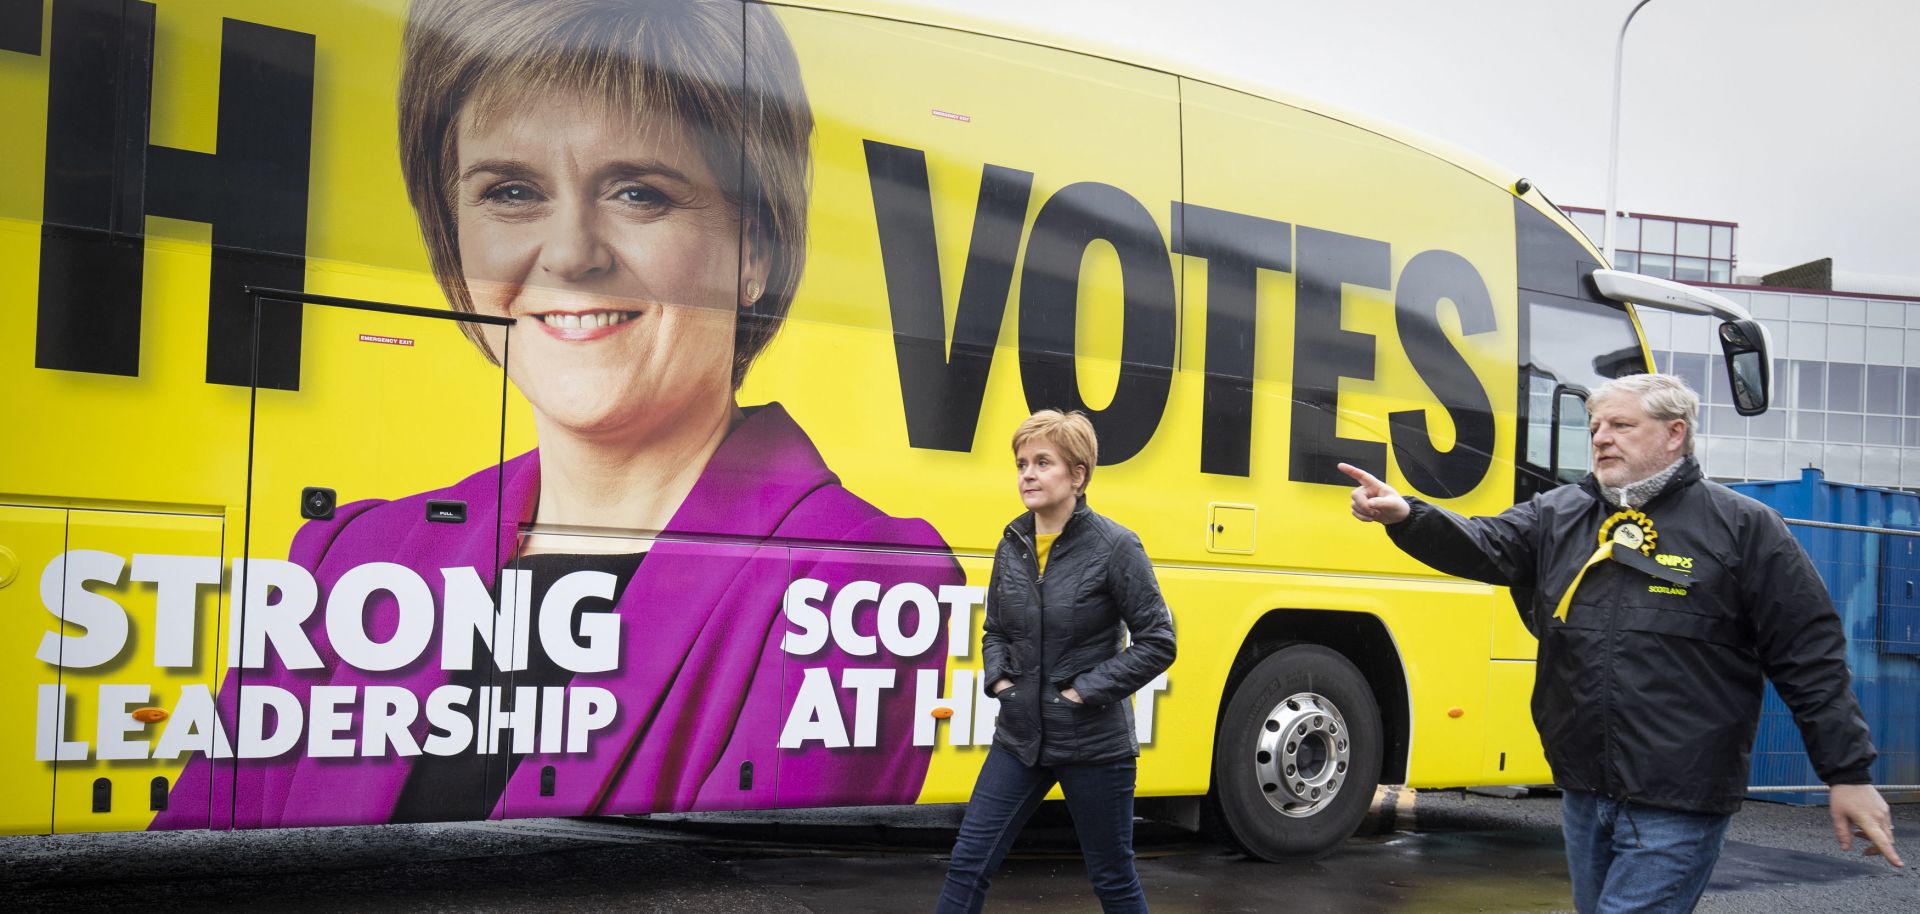 Scottish National Party (SNP) leader Nicola Sturgeon walks past her campaign bus with SNP candidate Angus Robertson in Edinburgh on May 4, 2021. 